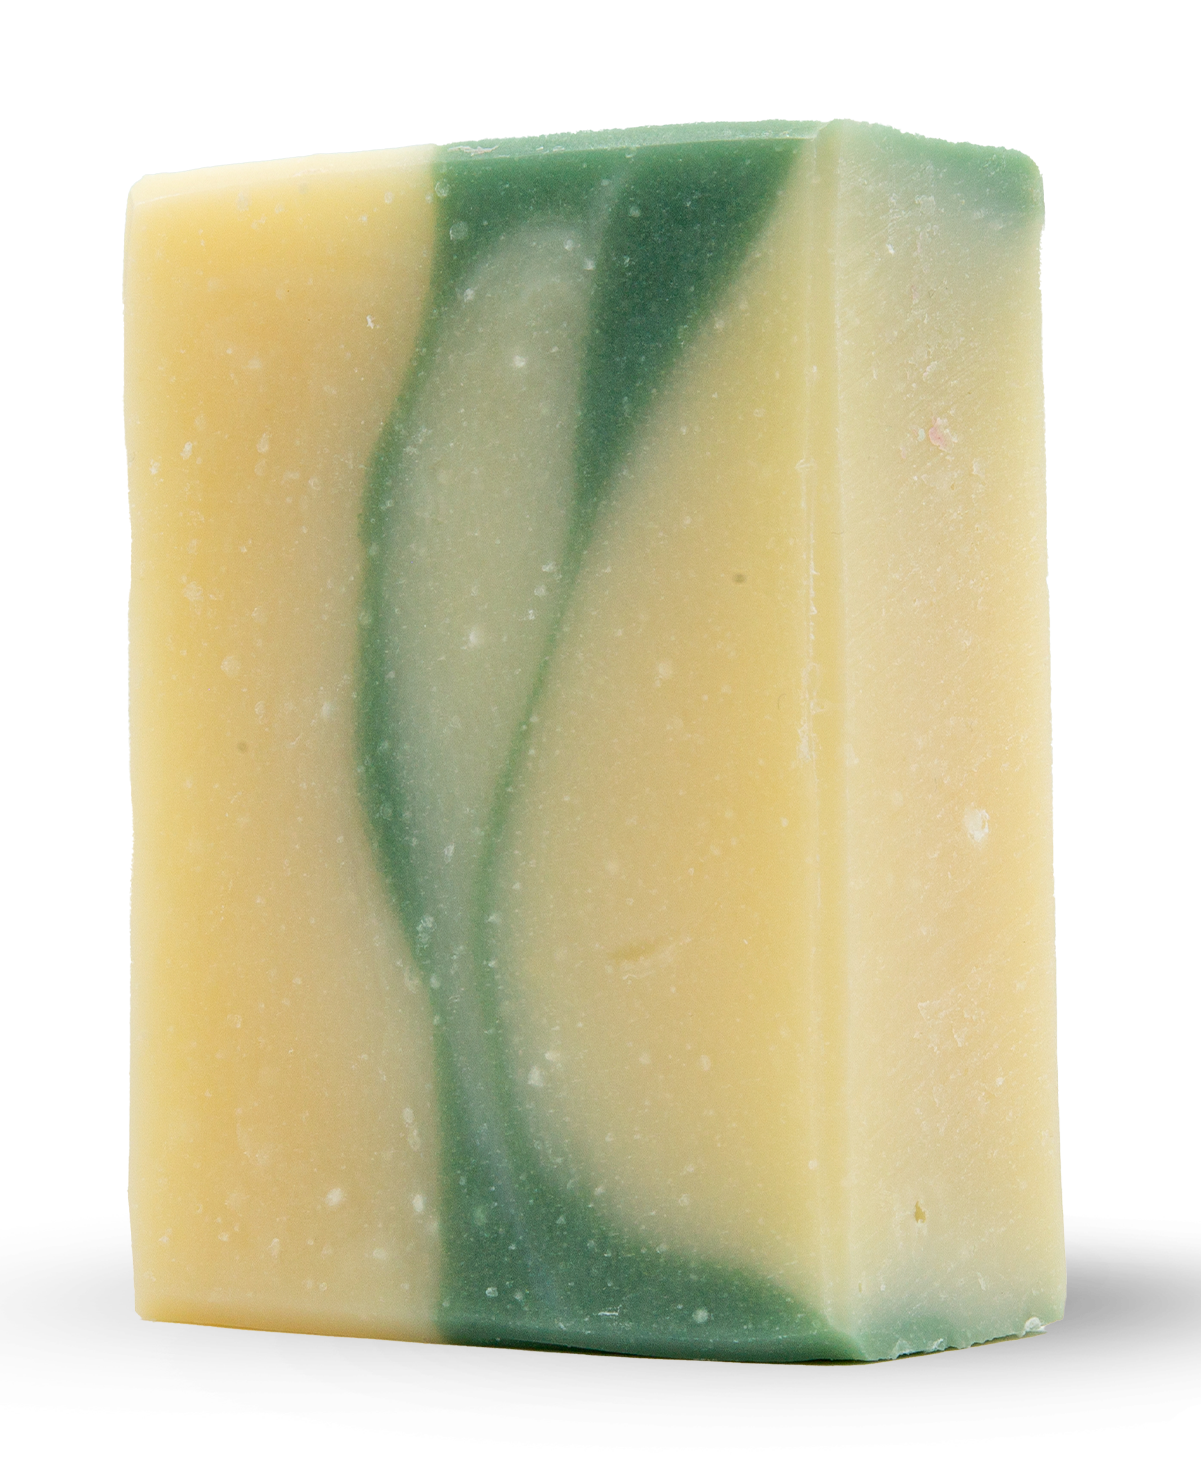 Cucumber Aloe All-Natural Luxury Soap